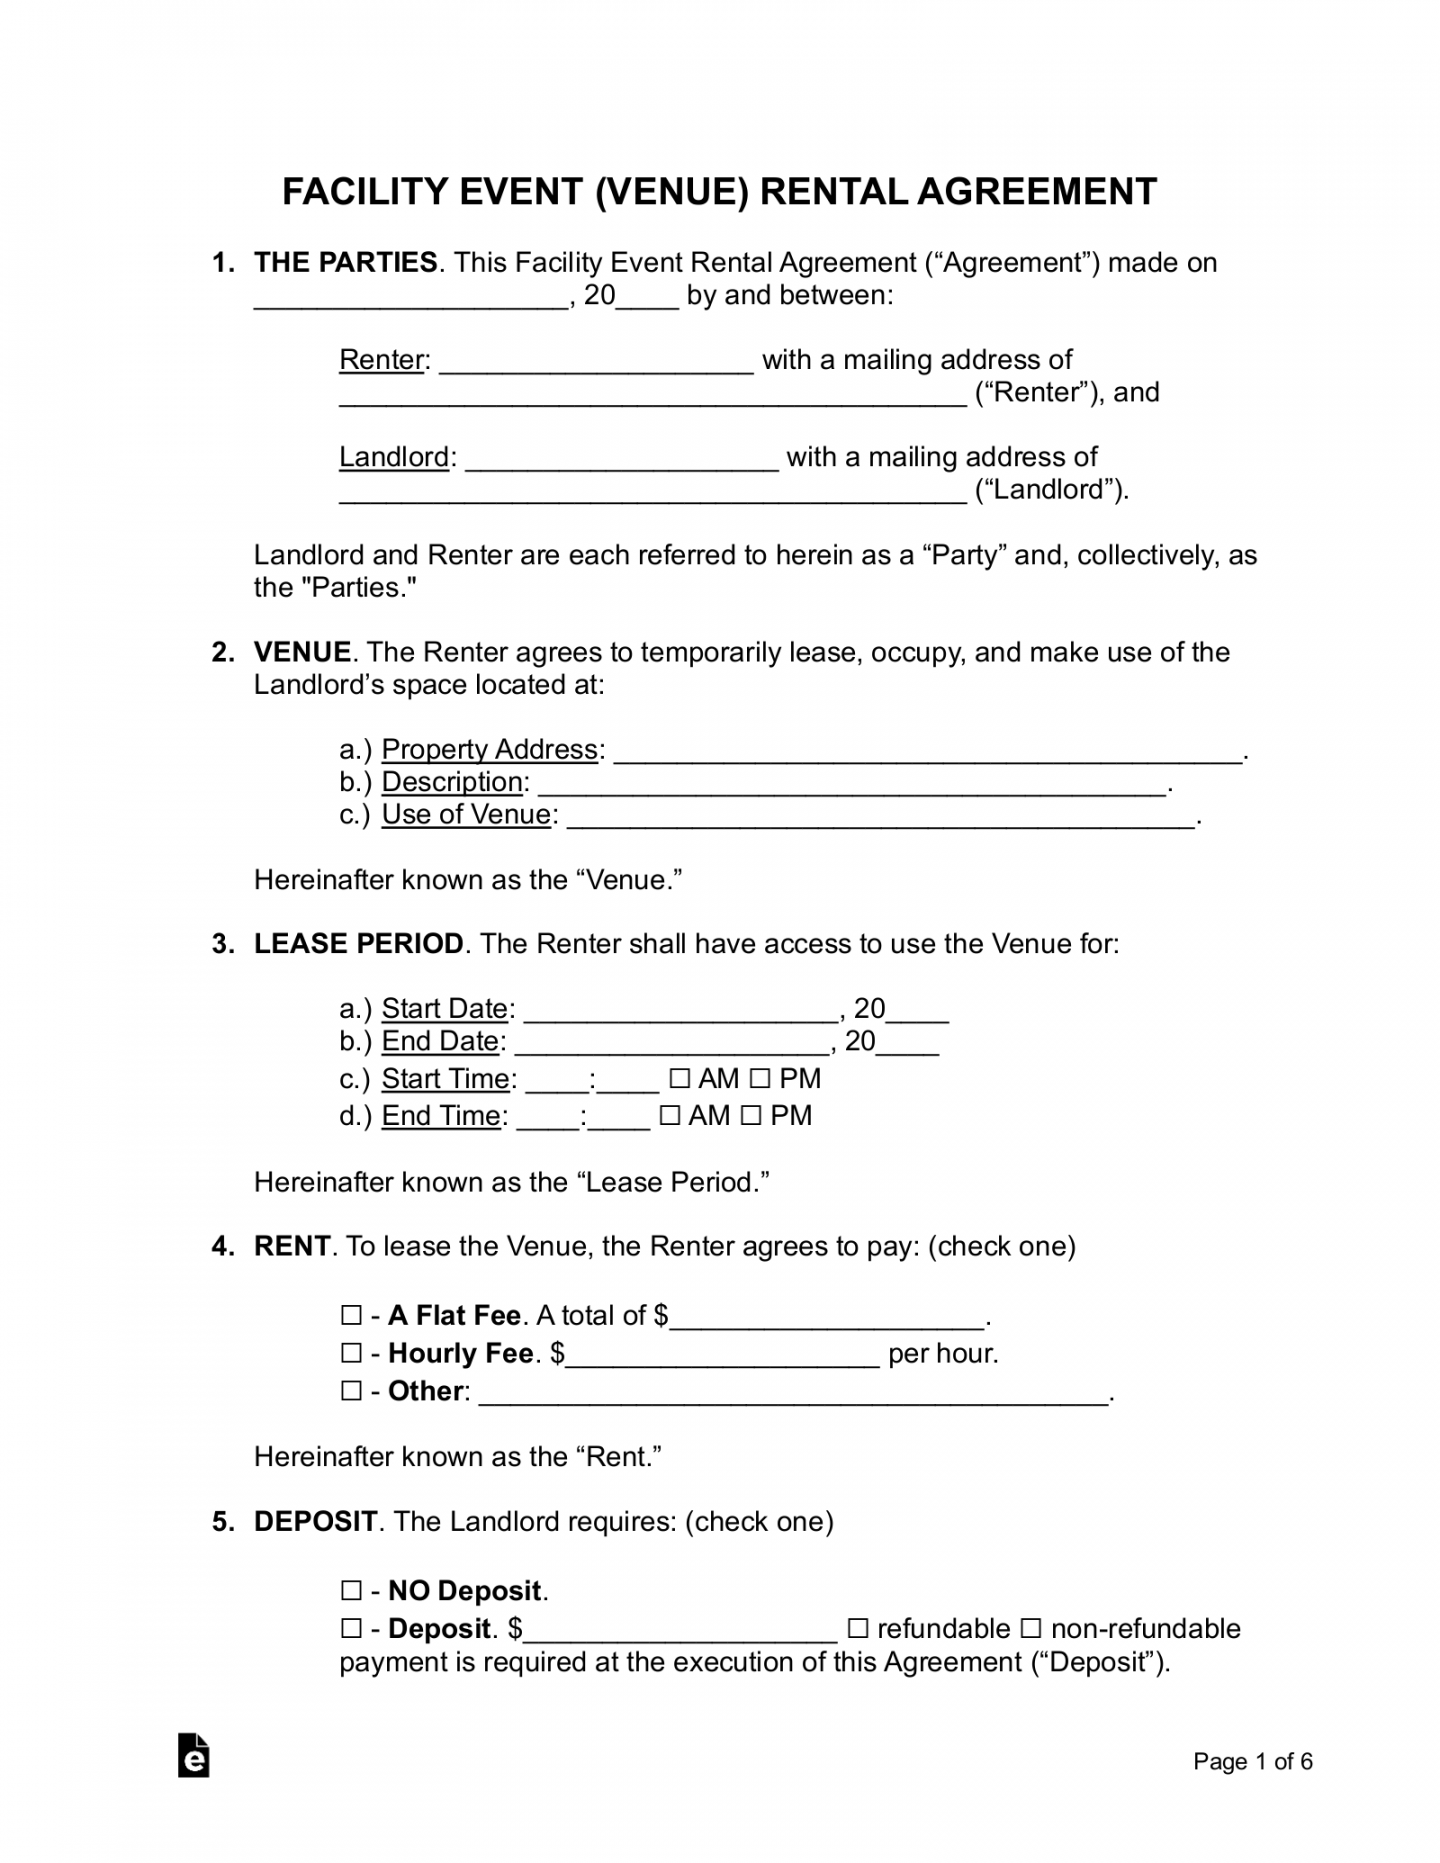 Free Venue (Event Space) Rental Agreement Template - PDF  Word